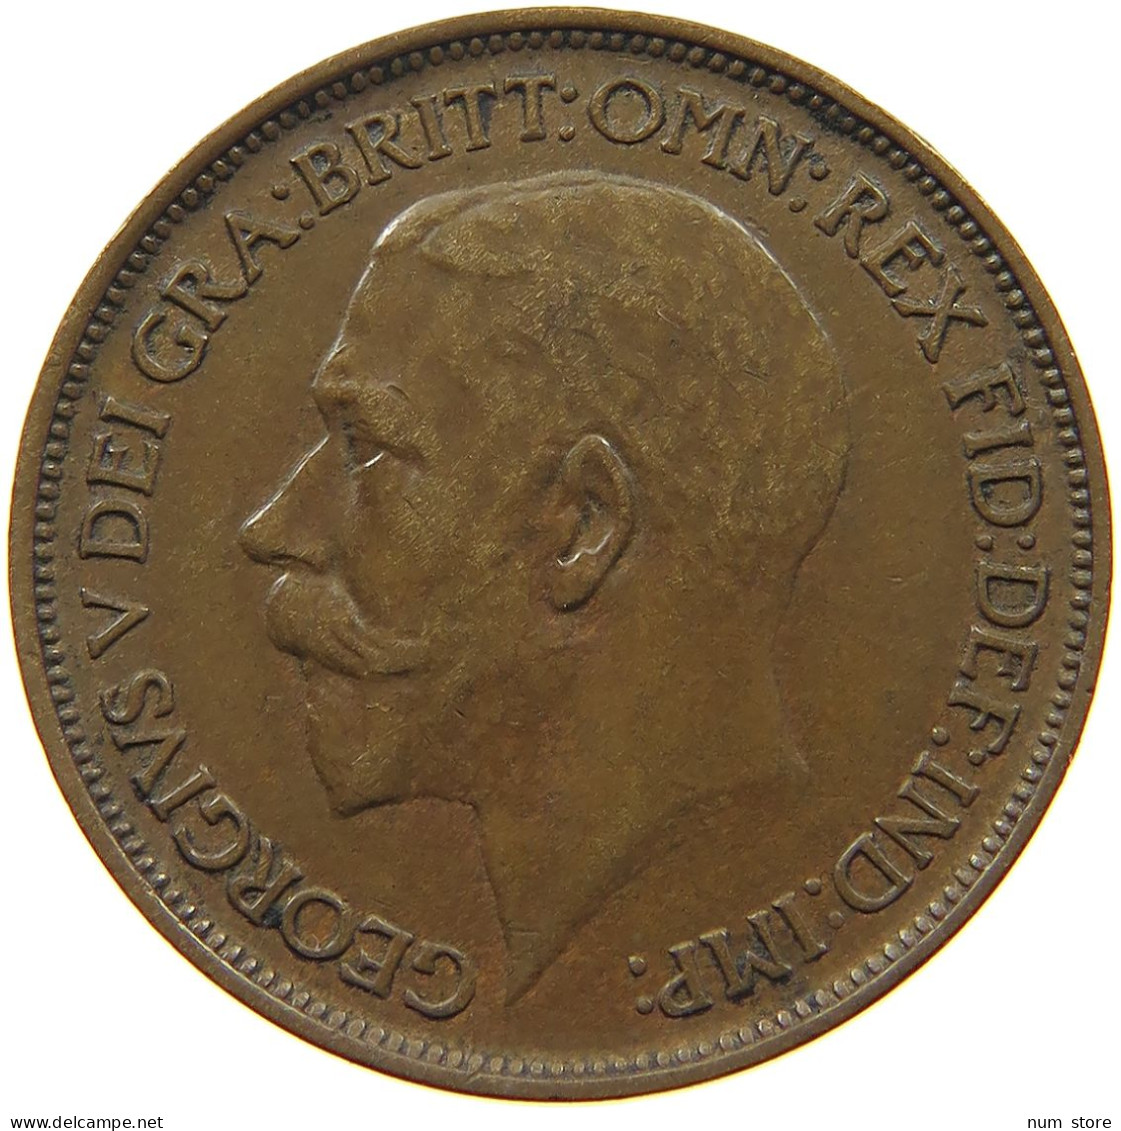 GREAT BRITAIN HALFPENNY 1912 George V. (1910-1936) #a031 0107 - C. 1/2 Penny